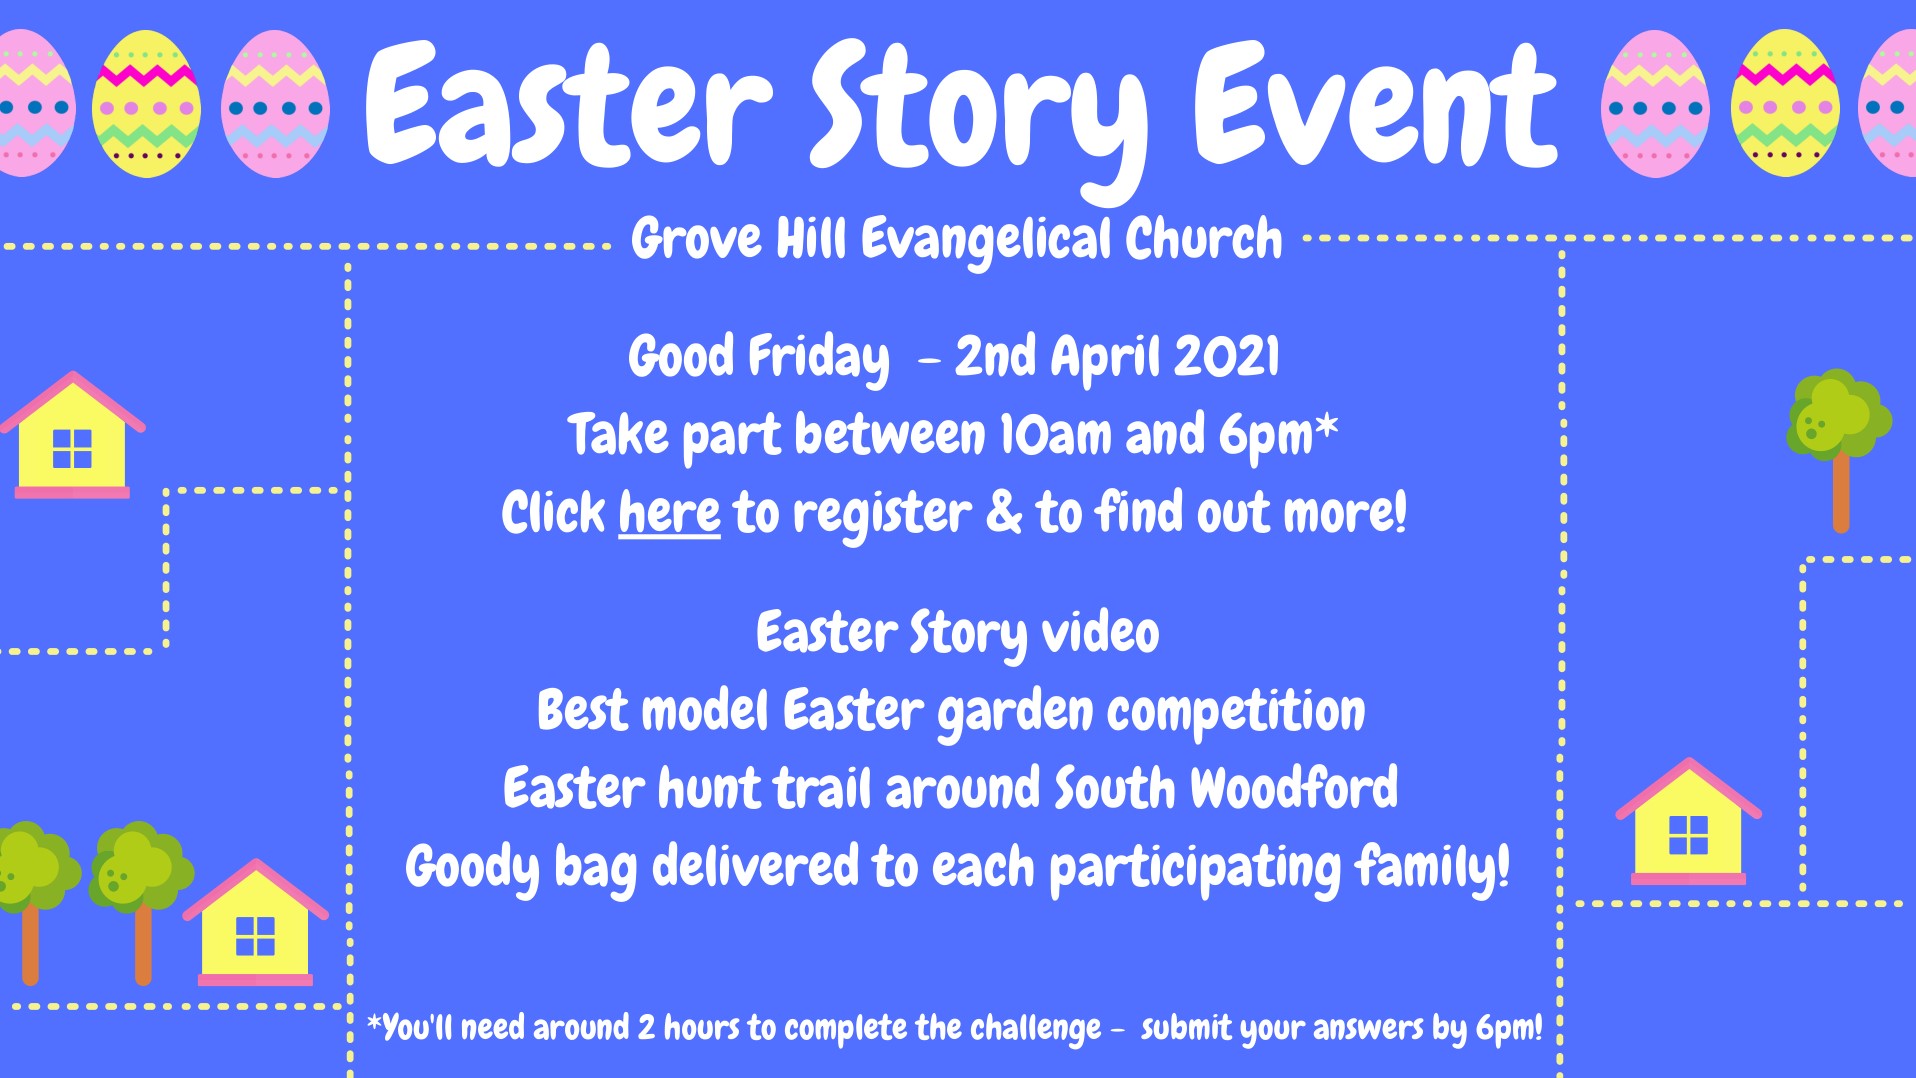 Easter Event 2021 Grove Hill Evangelical Church